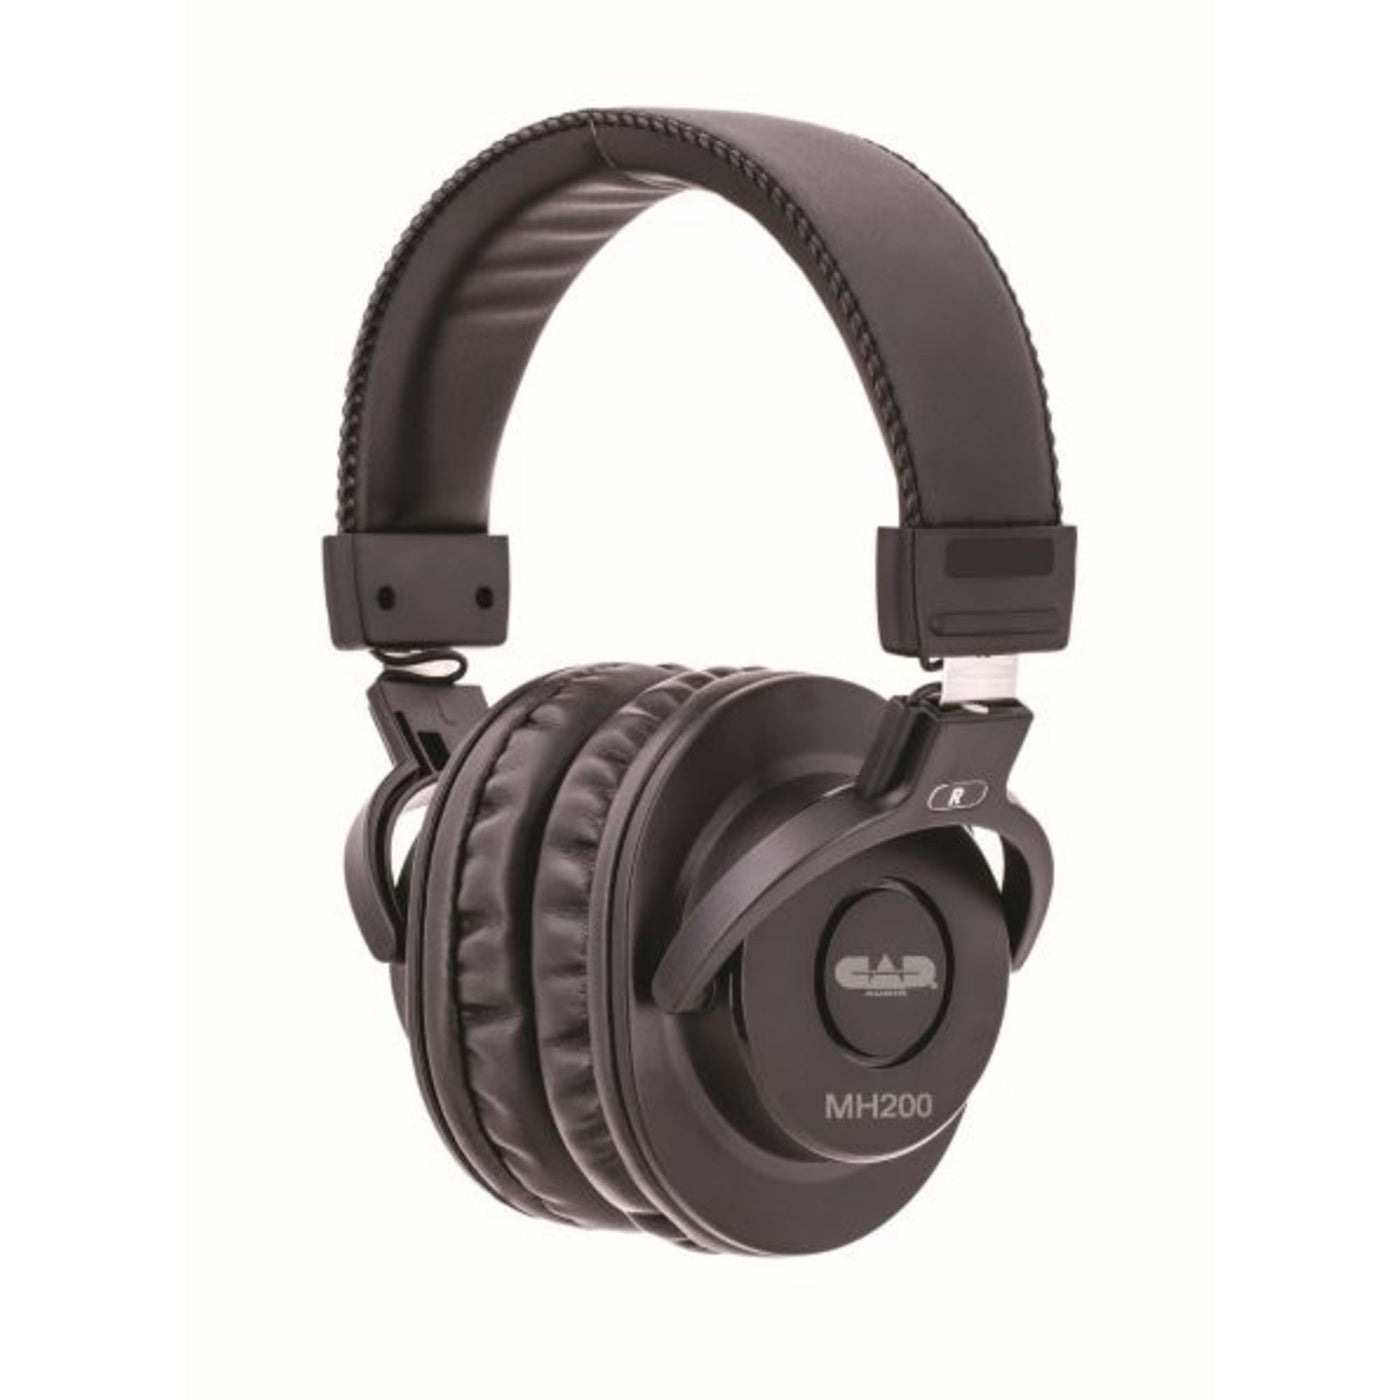 CAD Audio MH200 Closed-Back Studio Headphones with 50mm Drivers - Black (MH200)